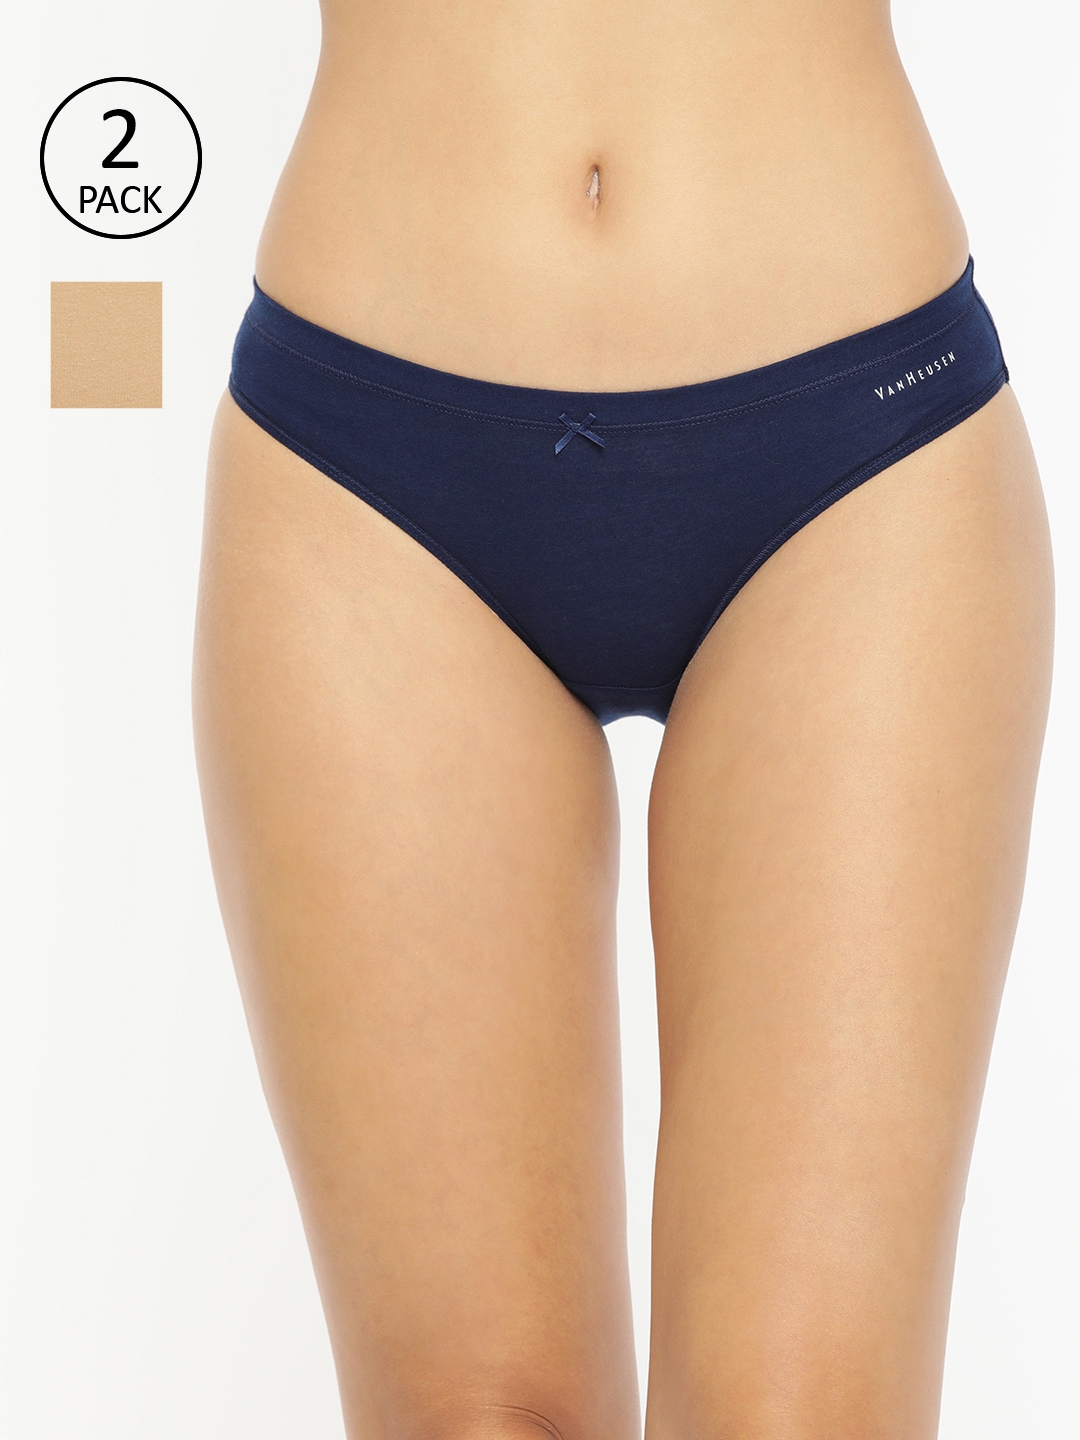 Buy Van Heusen Women Bikini Panty - Cotton Spandex - Pack Of 2 - Anti  Bacterial, No Marks Waistband, Moisture Wicking, Moderate  Coverage_11110_Assorted_S at